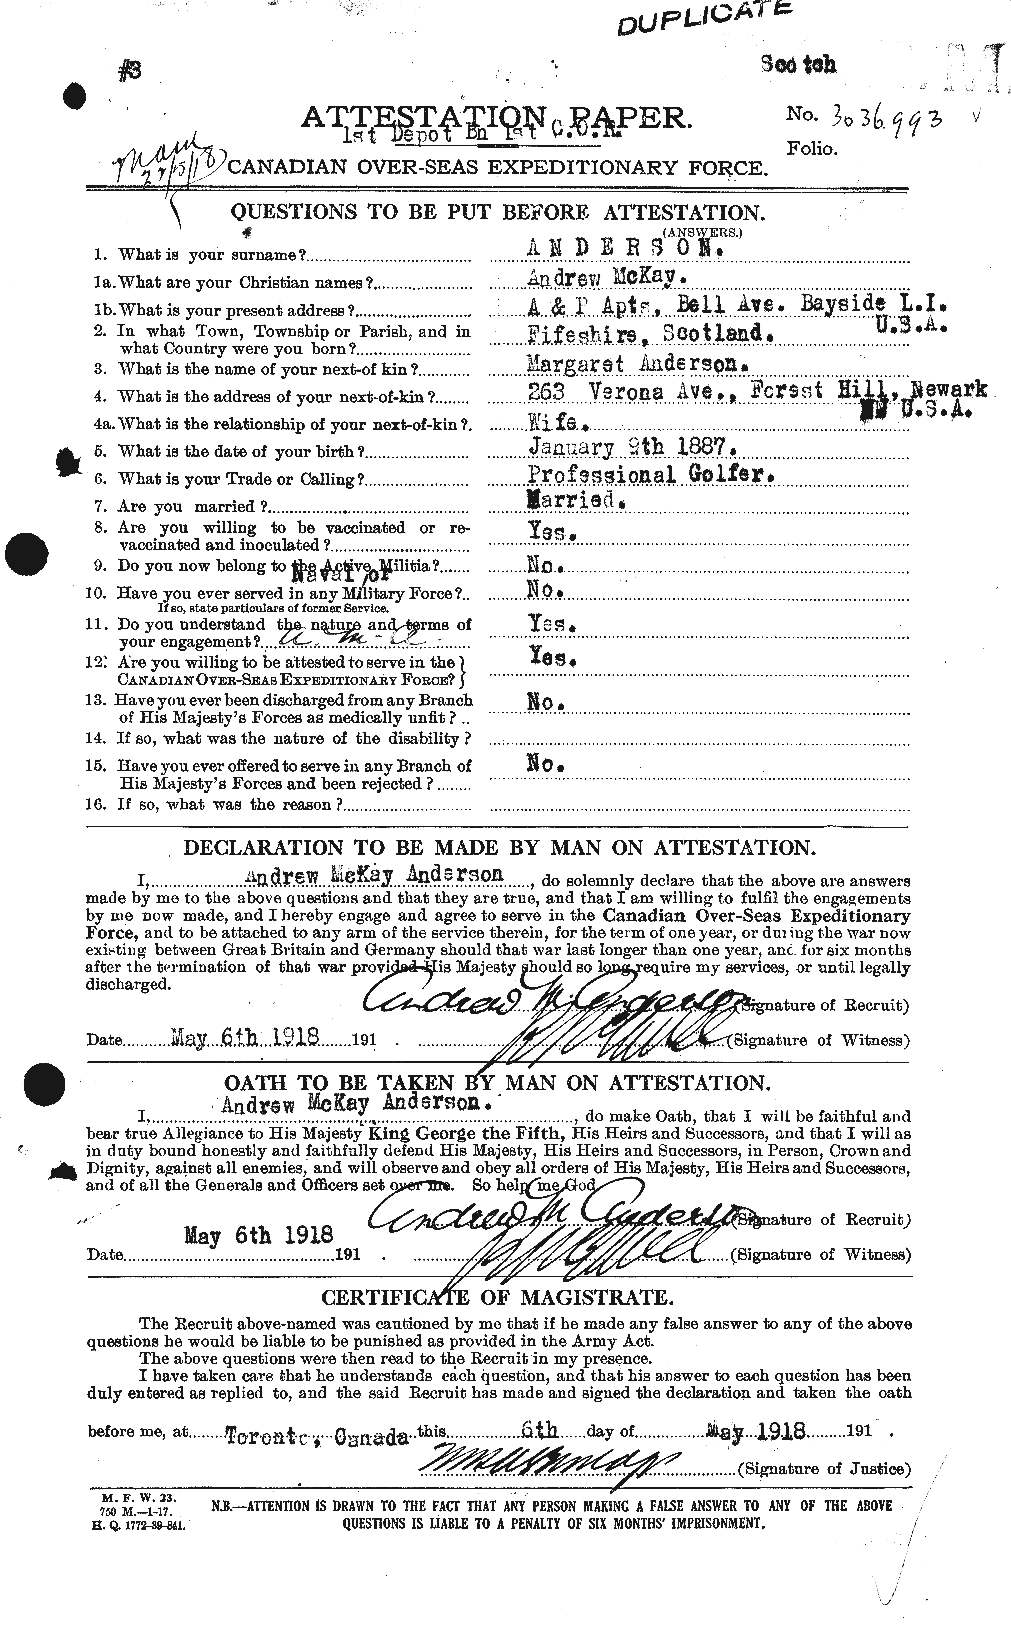 Personnel Records of the First World War - CEF 209401a